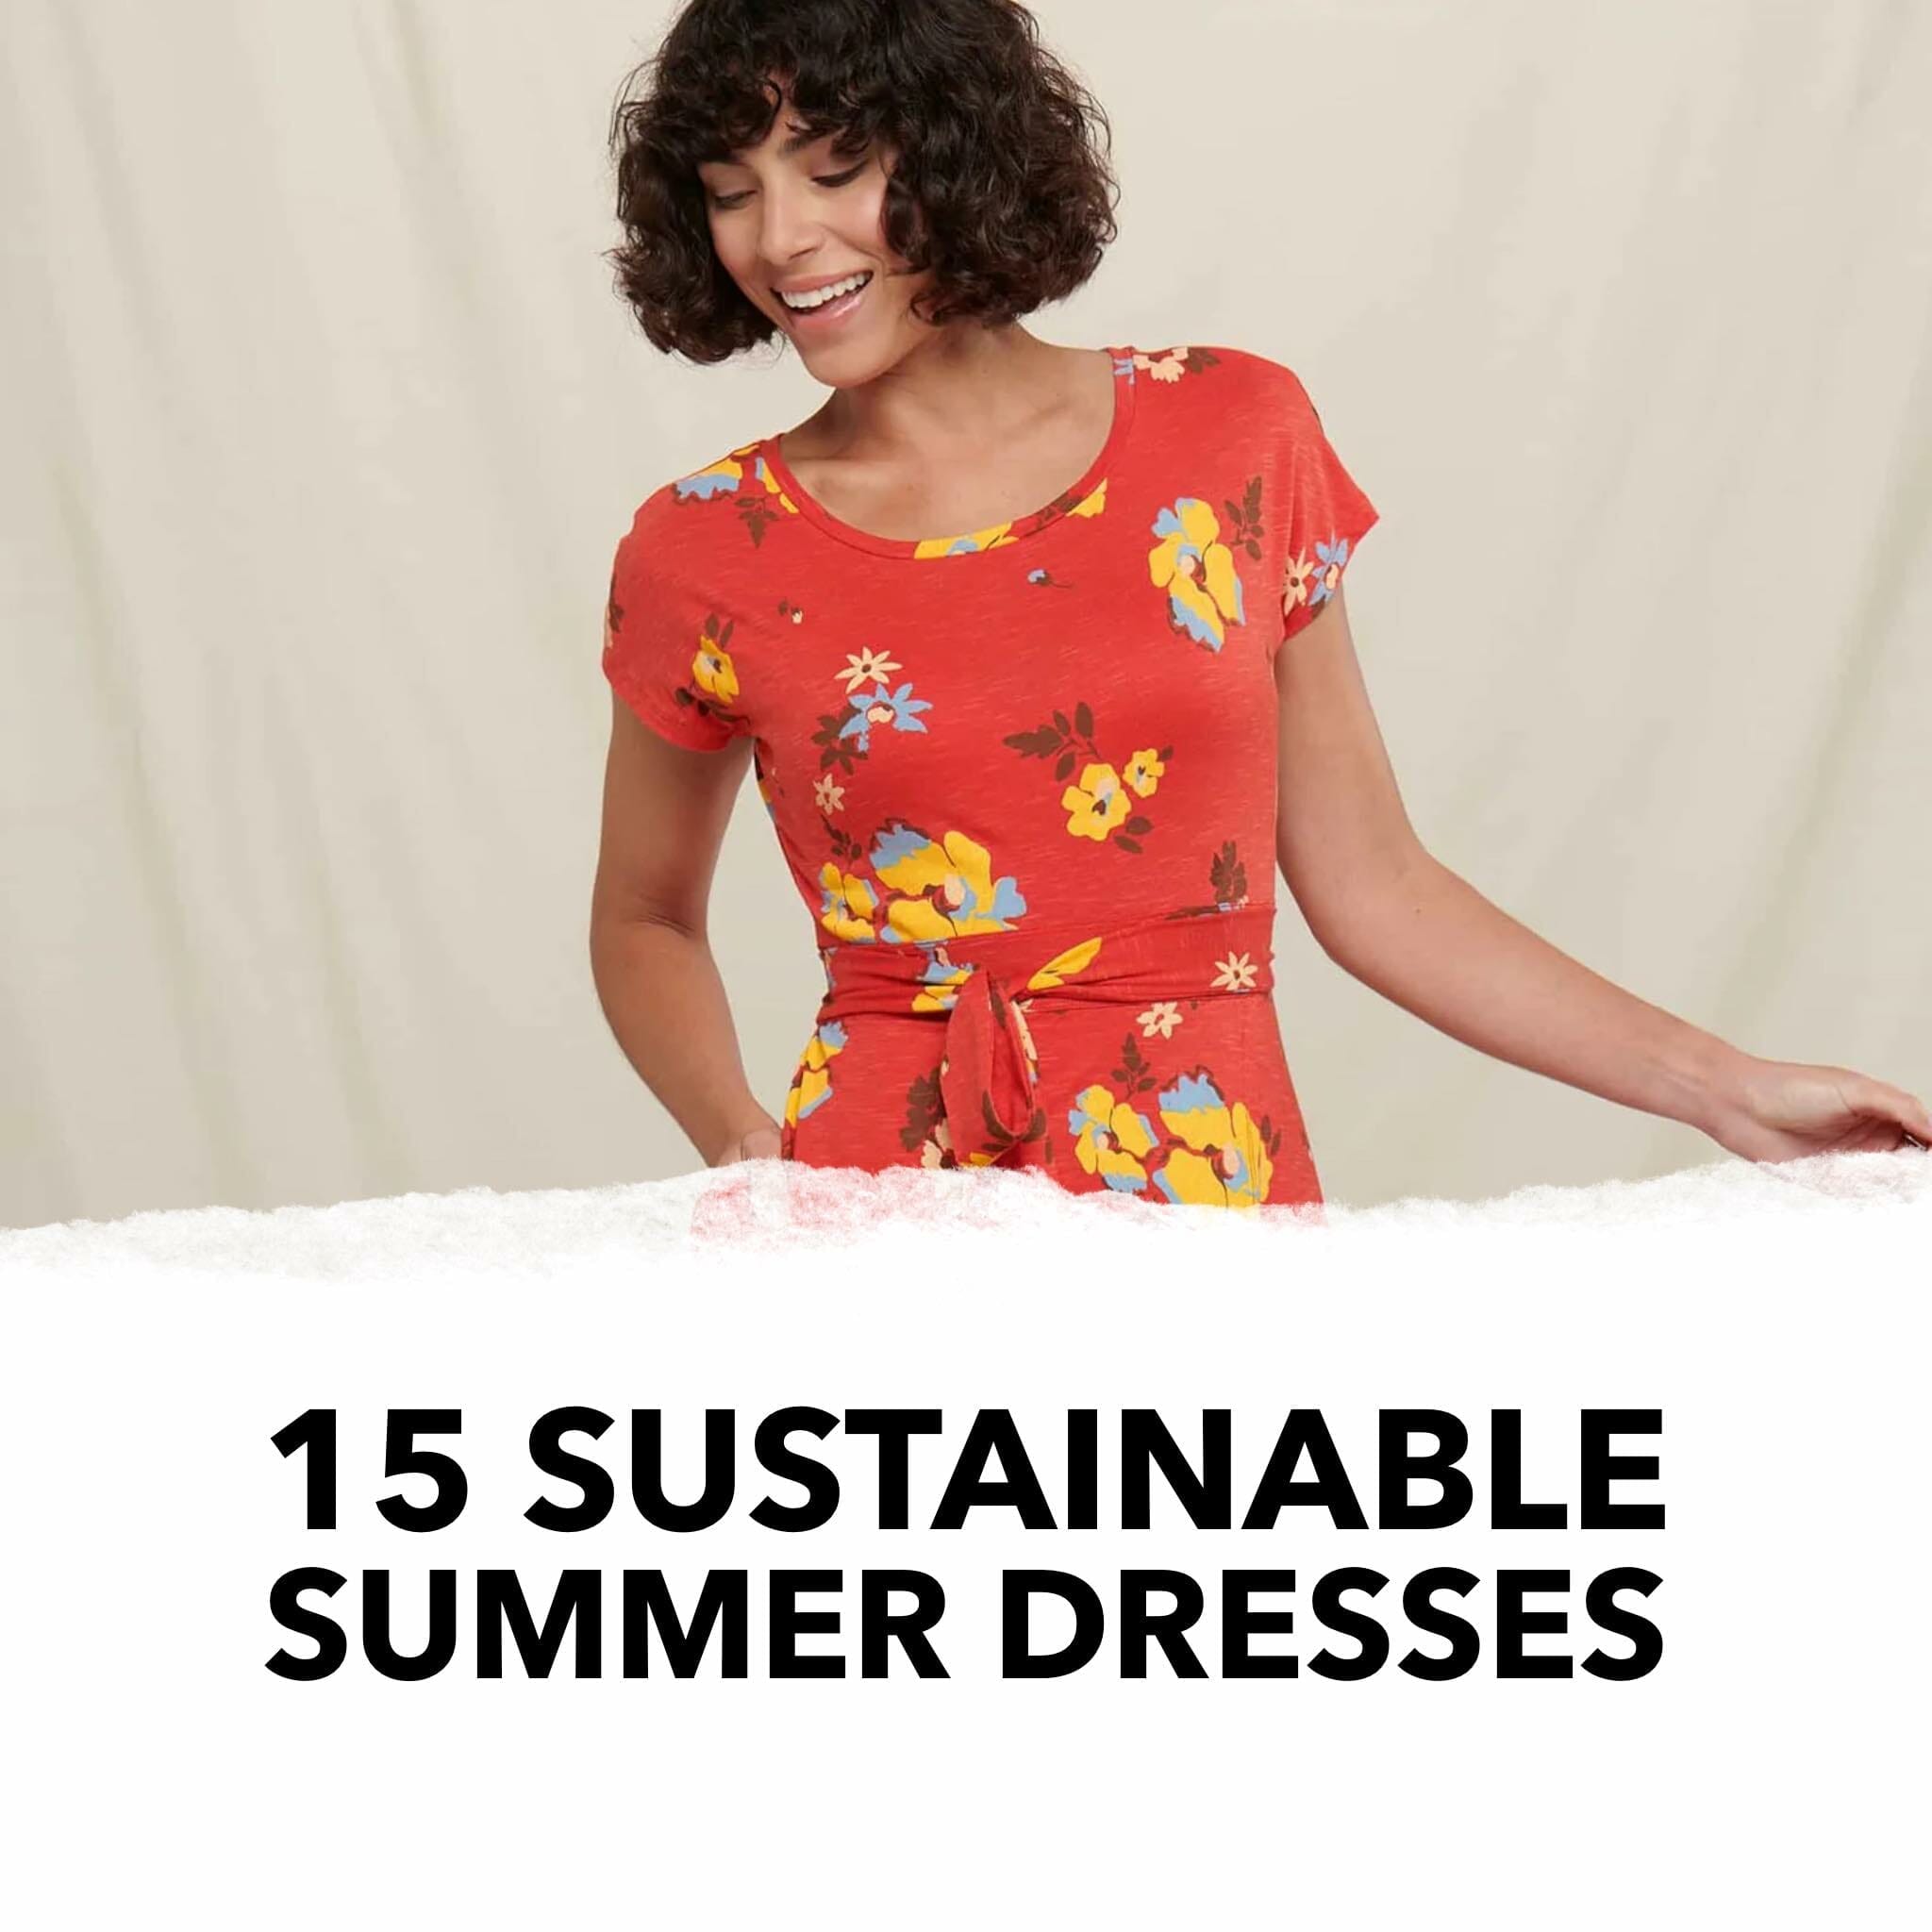 15 Eco-Friendly Sustainable Summer Dresses to Wear All Season Long